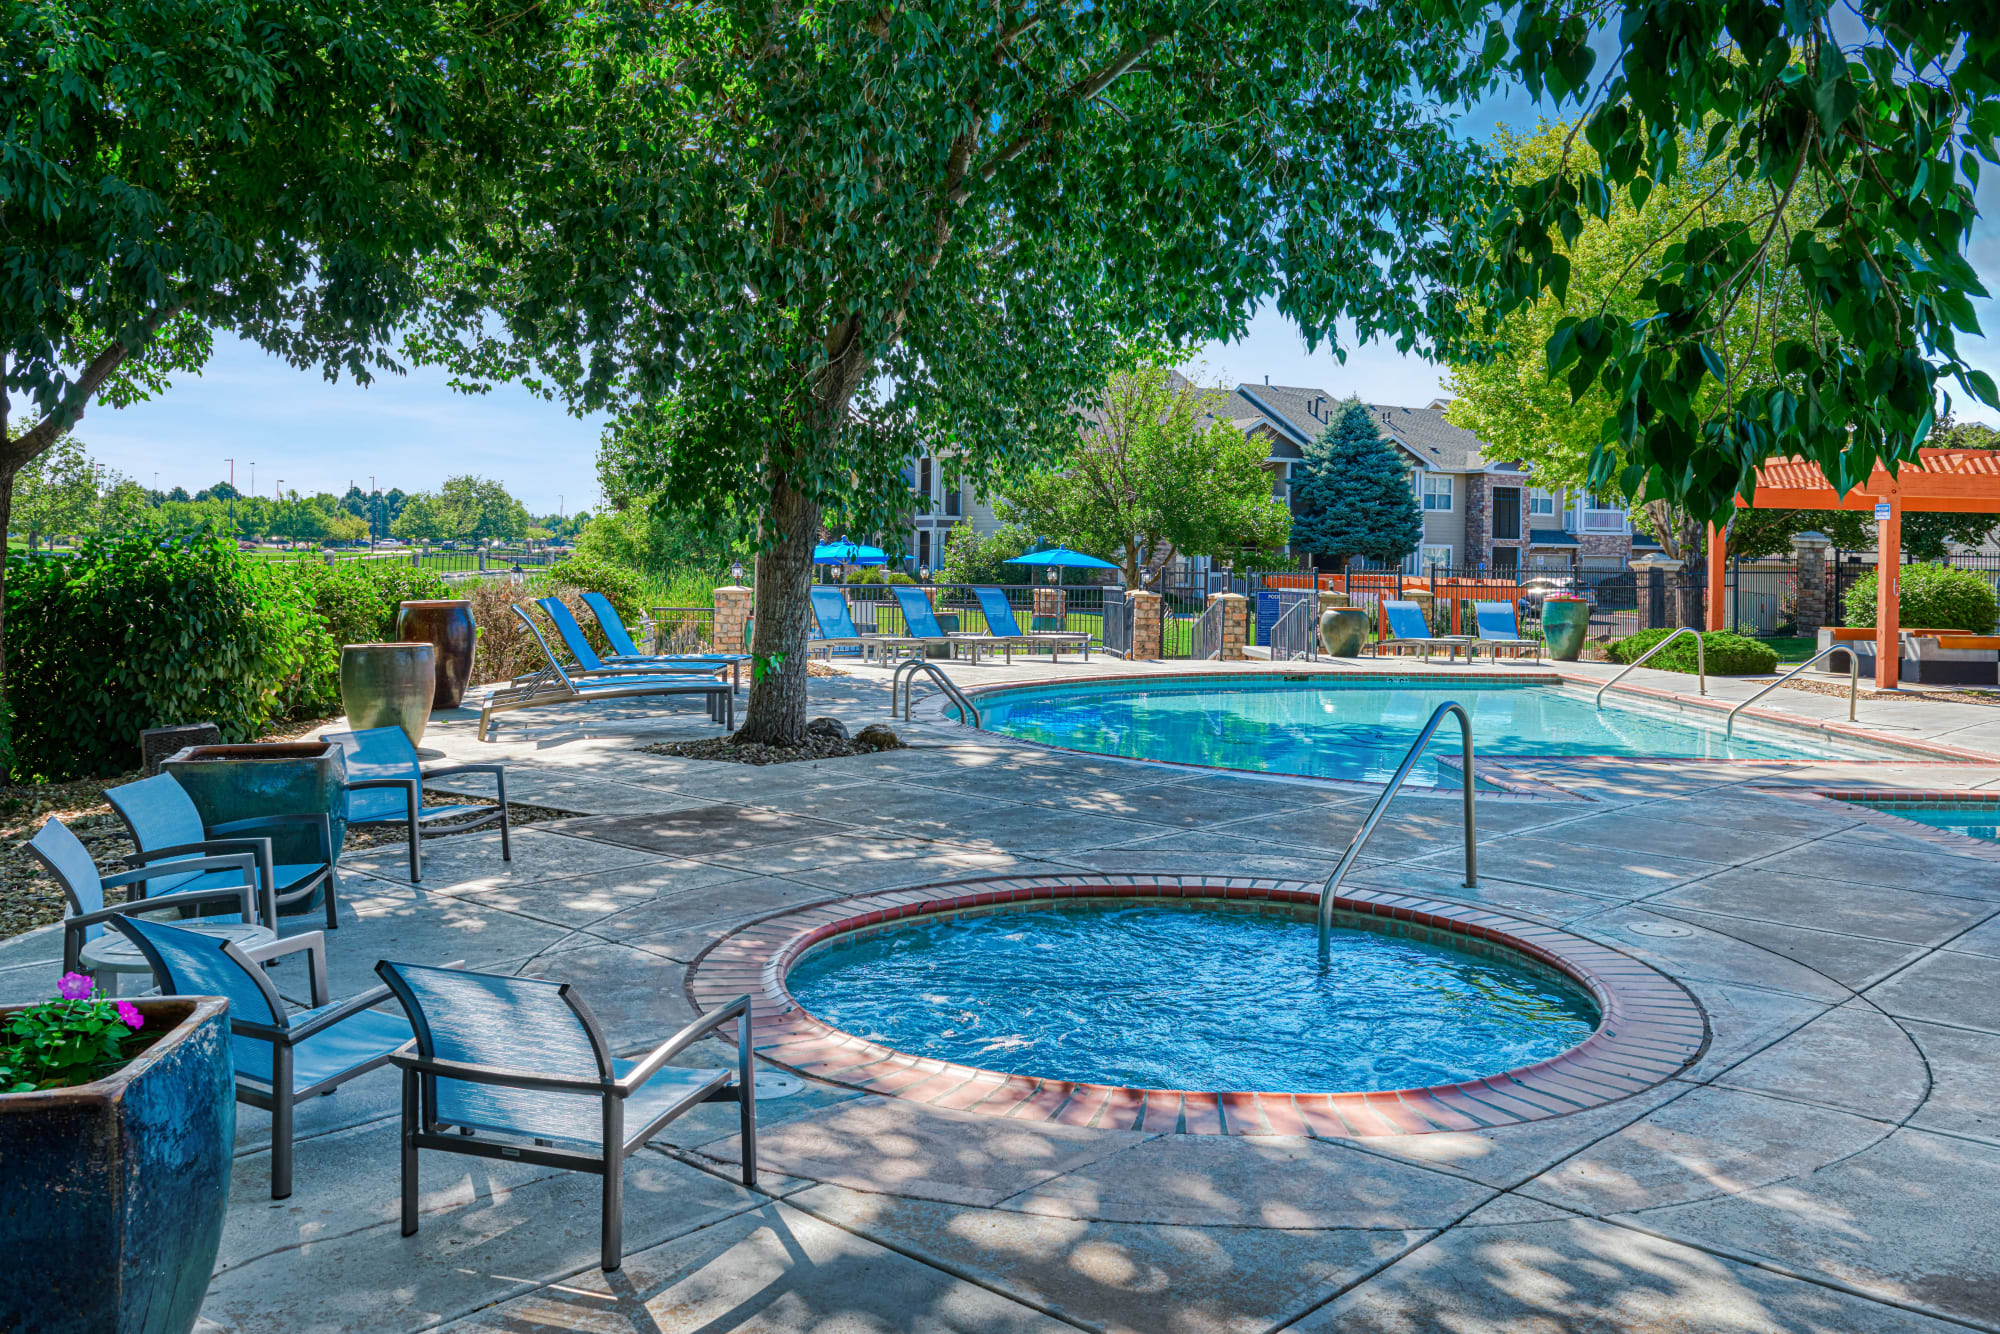 Table and chairs around the pool at Gateway Park Apartments in Denver, Colorado